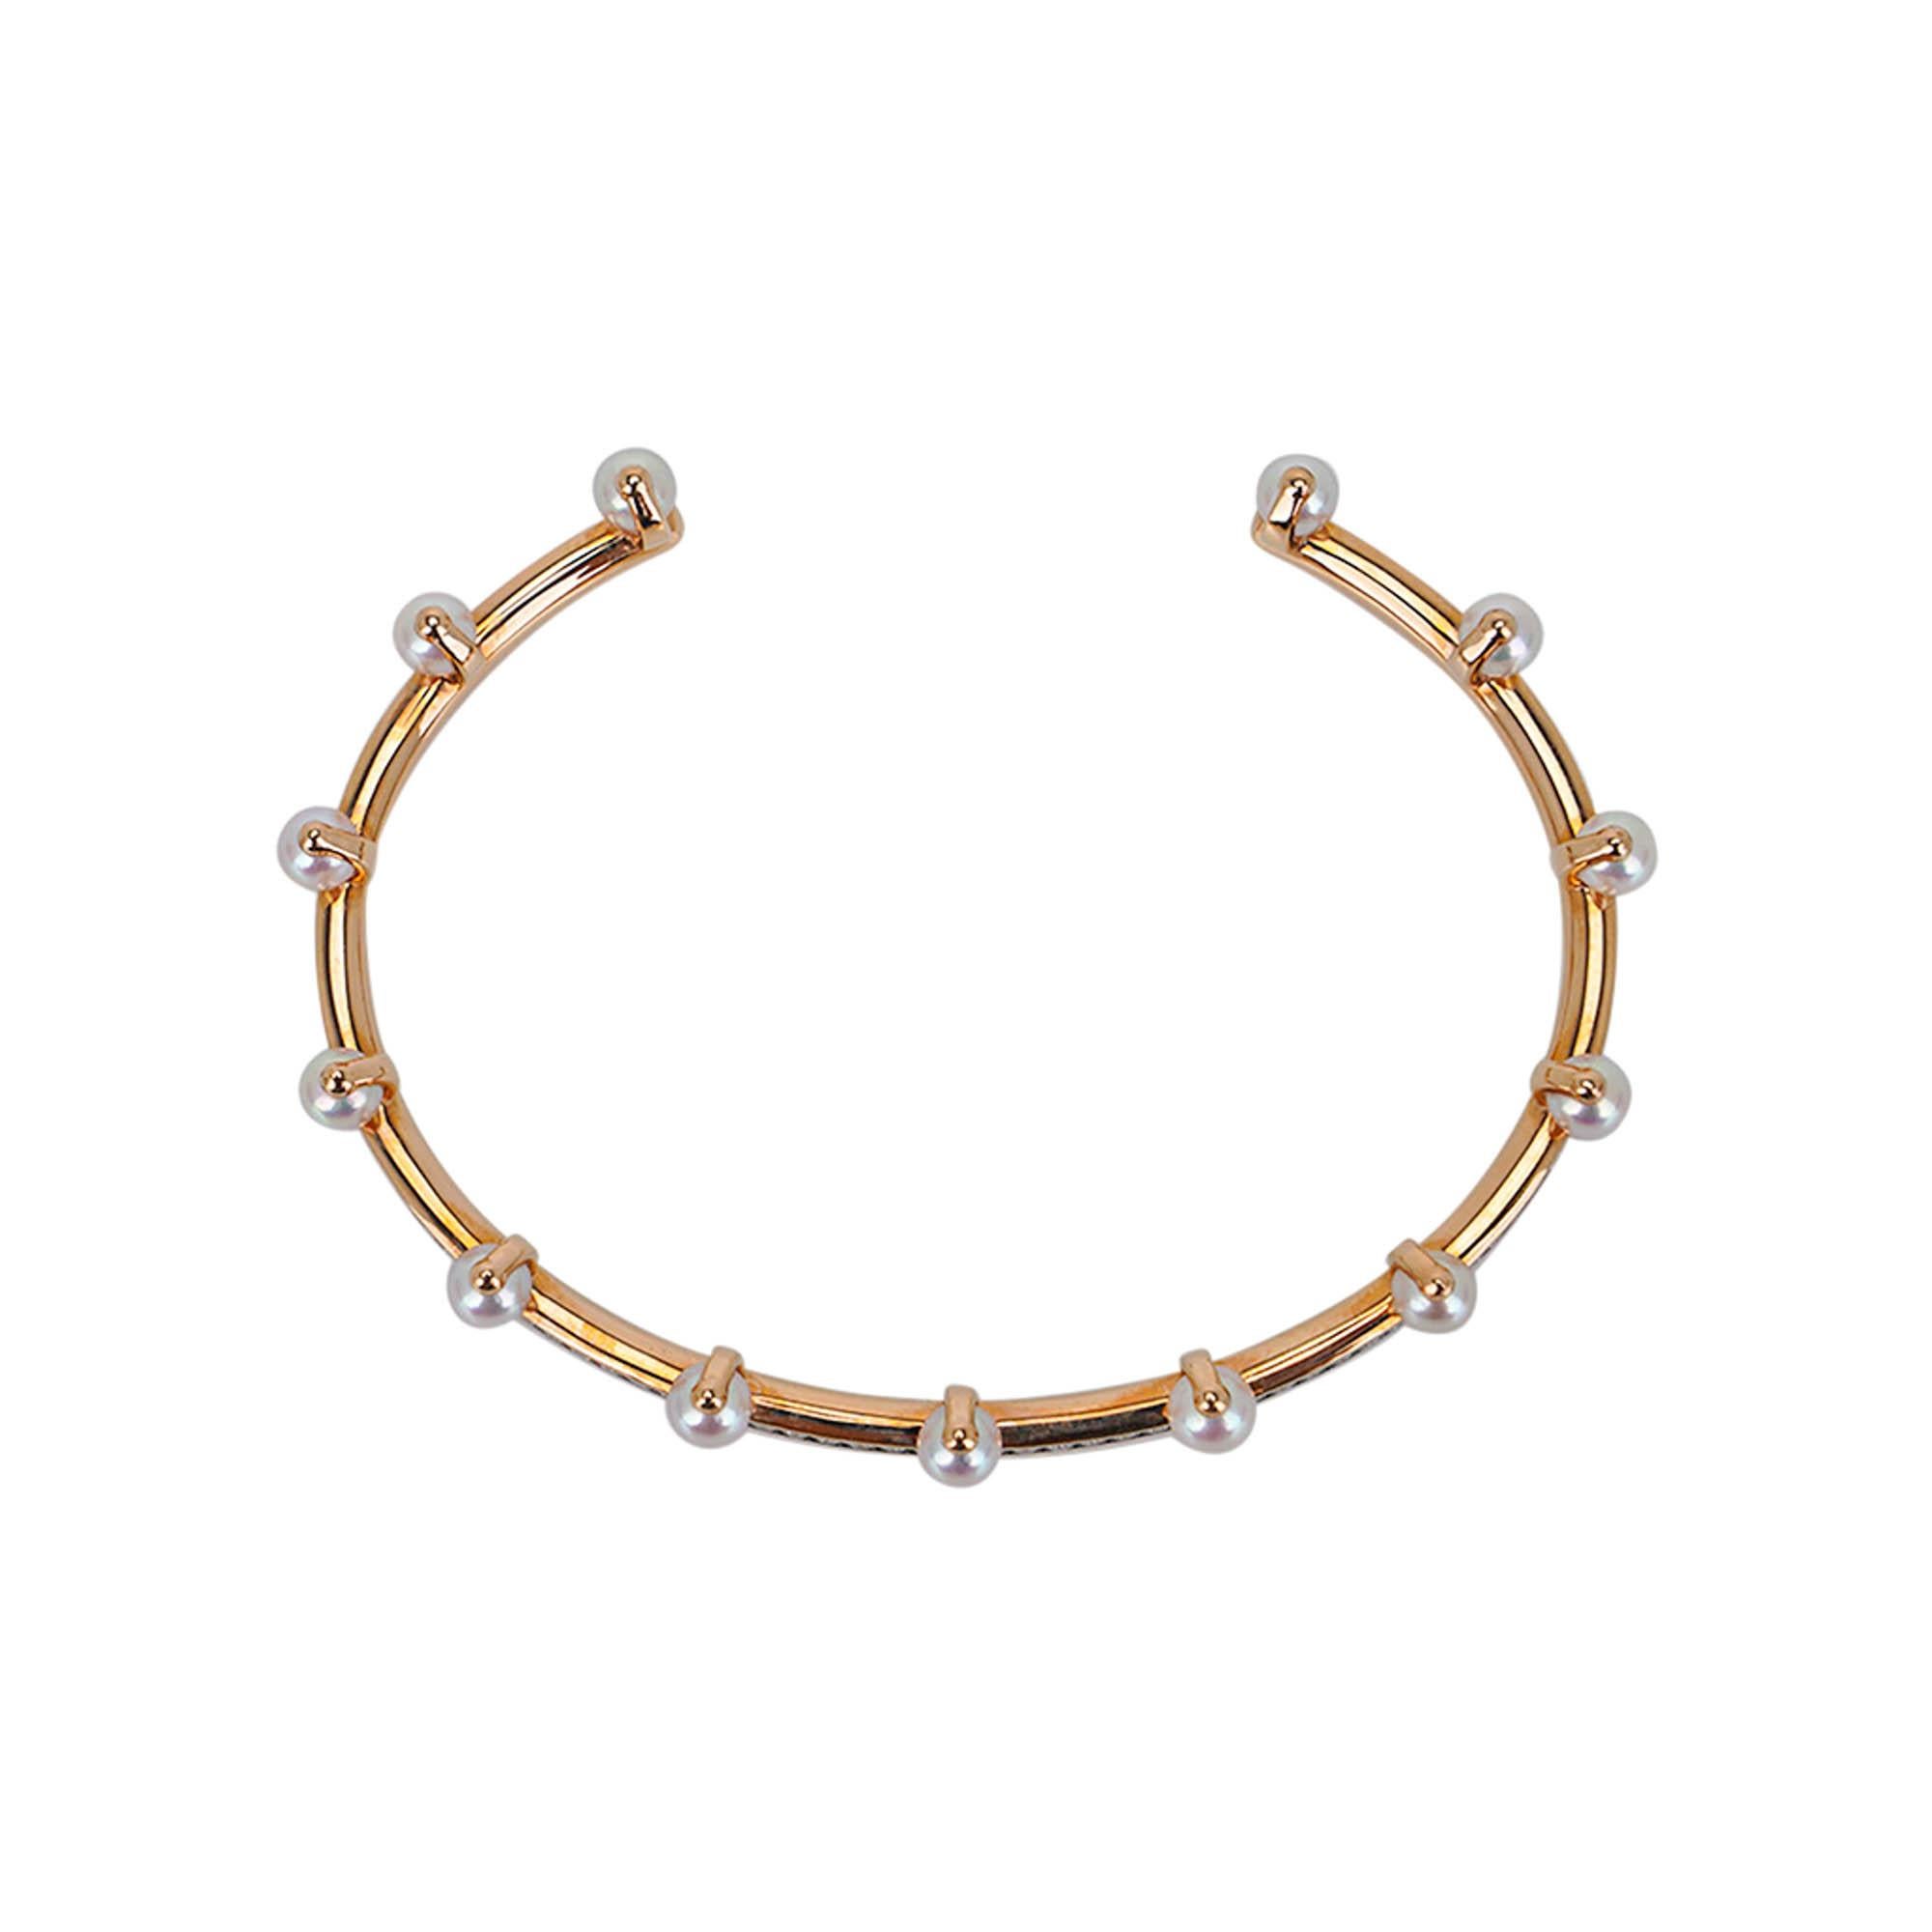 Hermes Chandra Jonc Pearl and Diamond Cuff Bracelet 18k Rose Gold In New Condition For Sale In Miami, FL